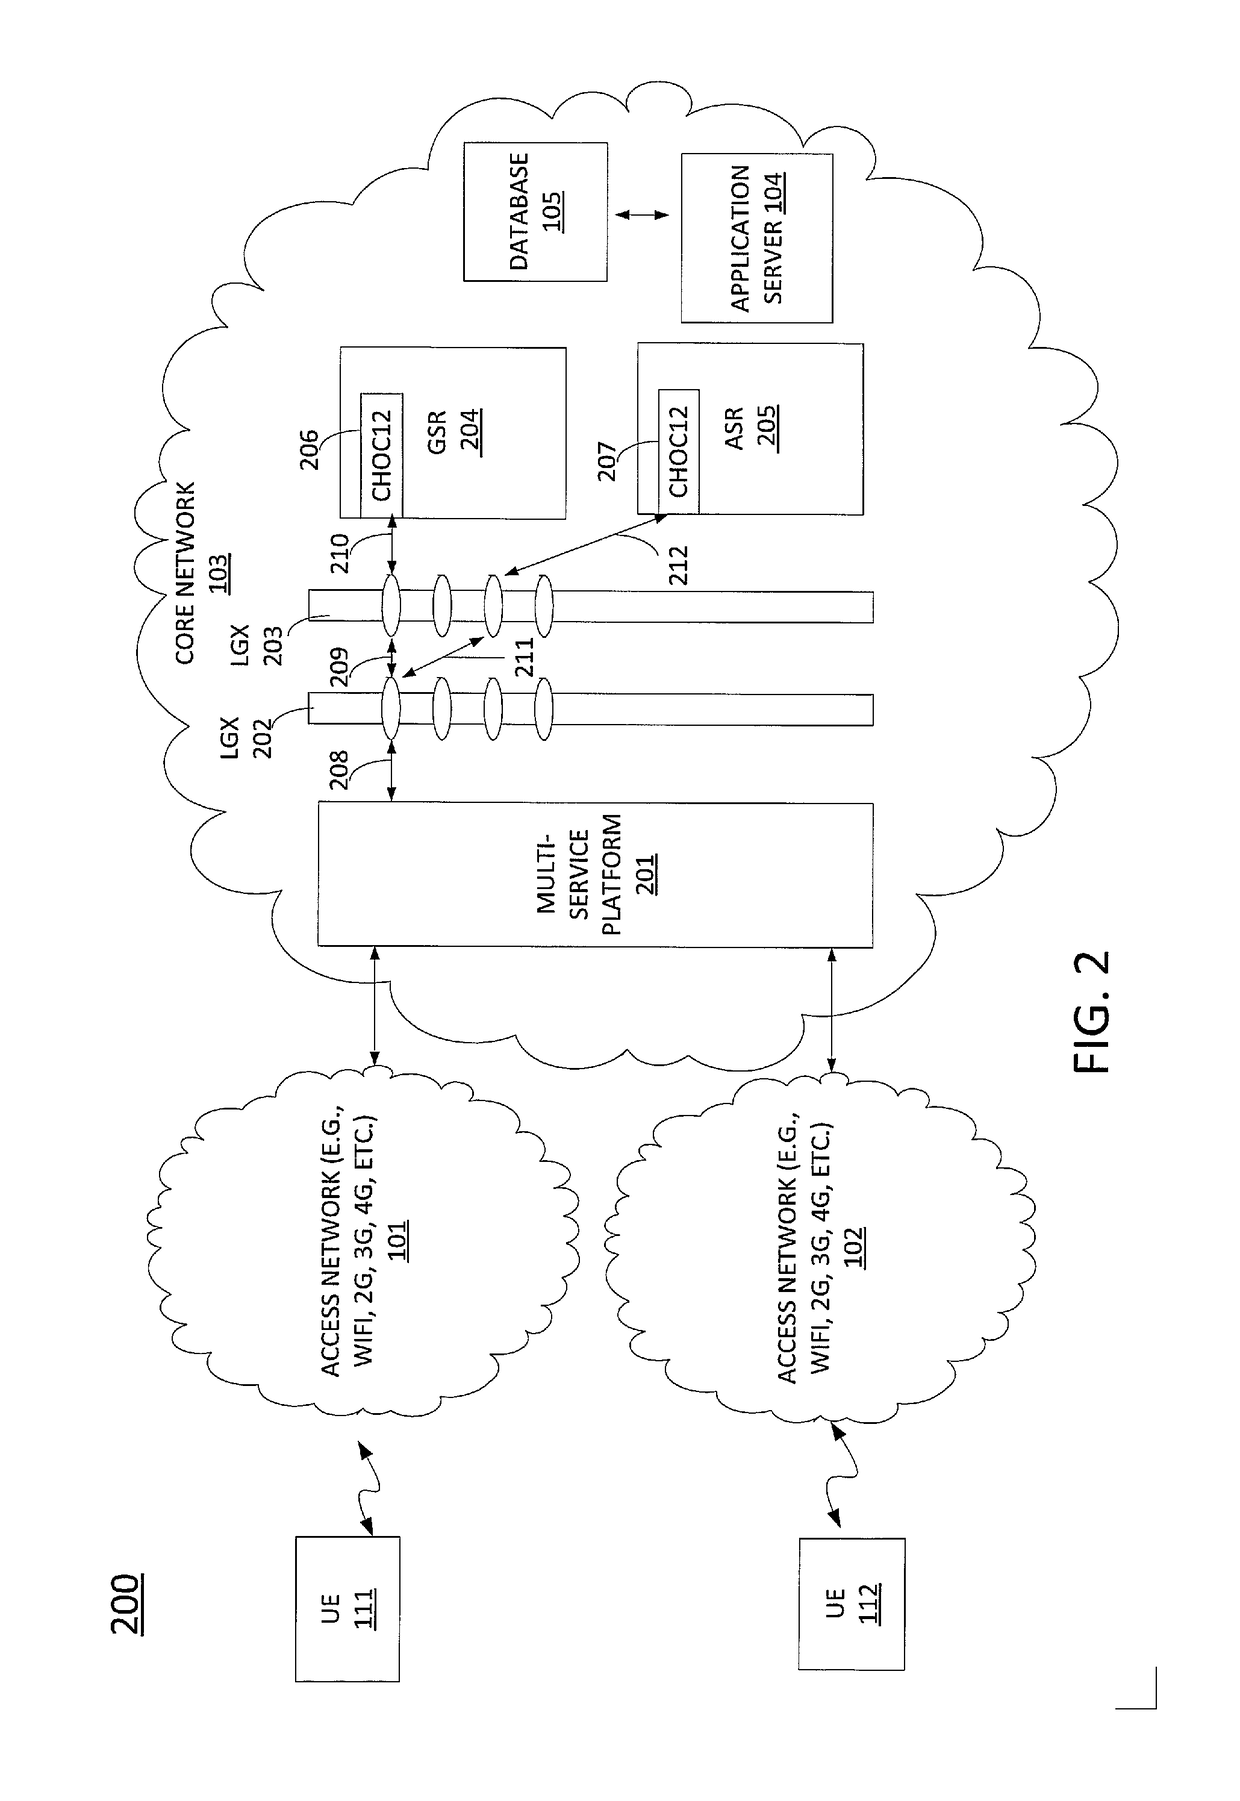 Method and apparatus for providing a bulk migration tool for a network